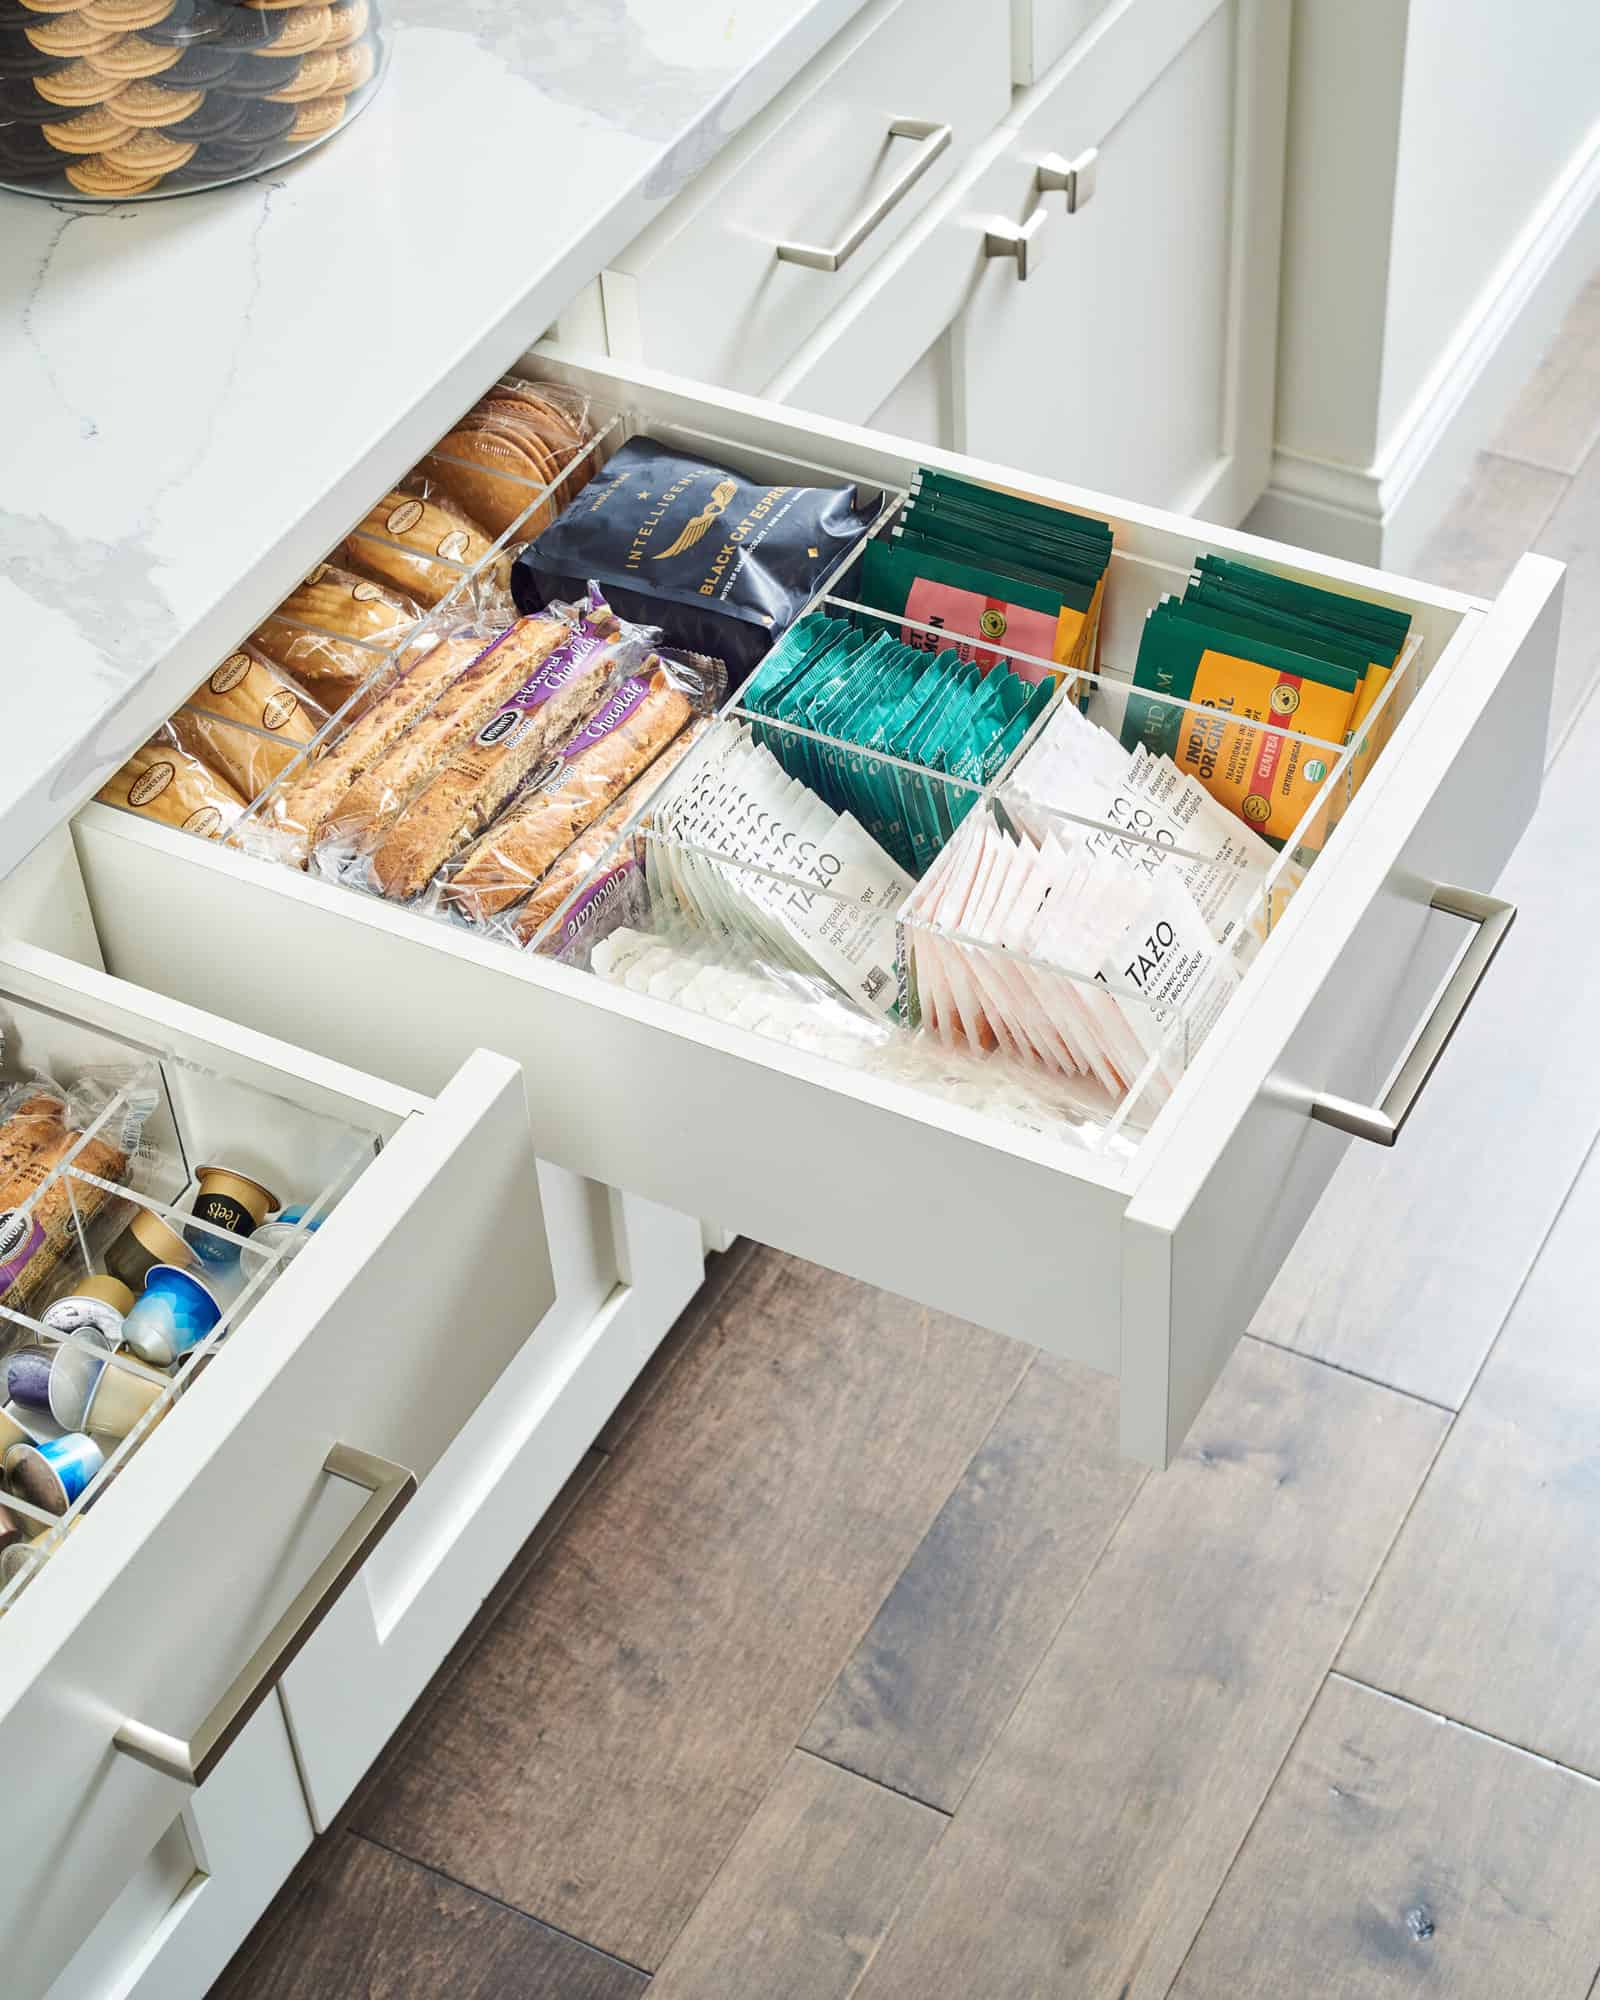 How to Make a Spice Drawer Organizer in a Small Space - Sabrinas Organizing